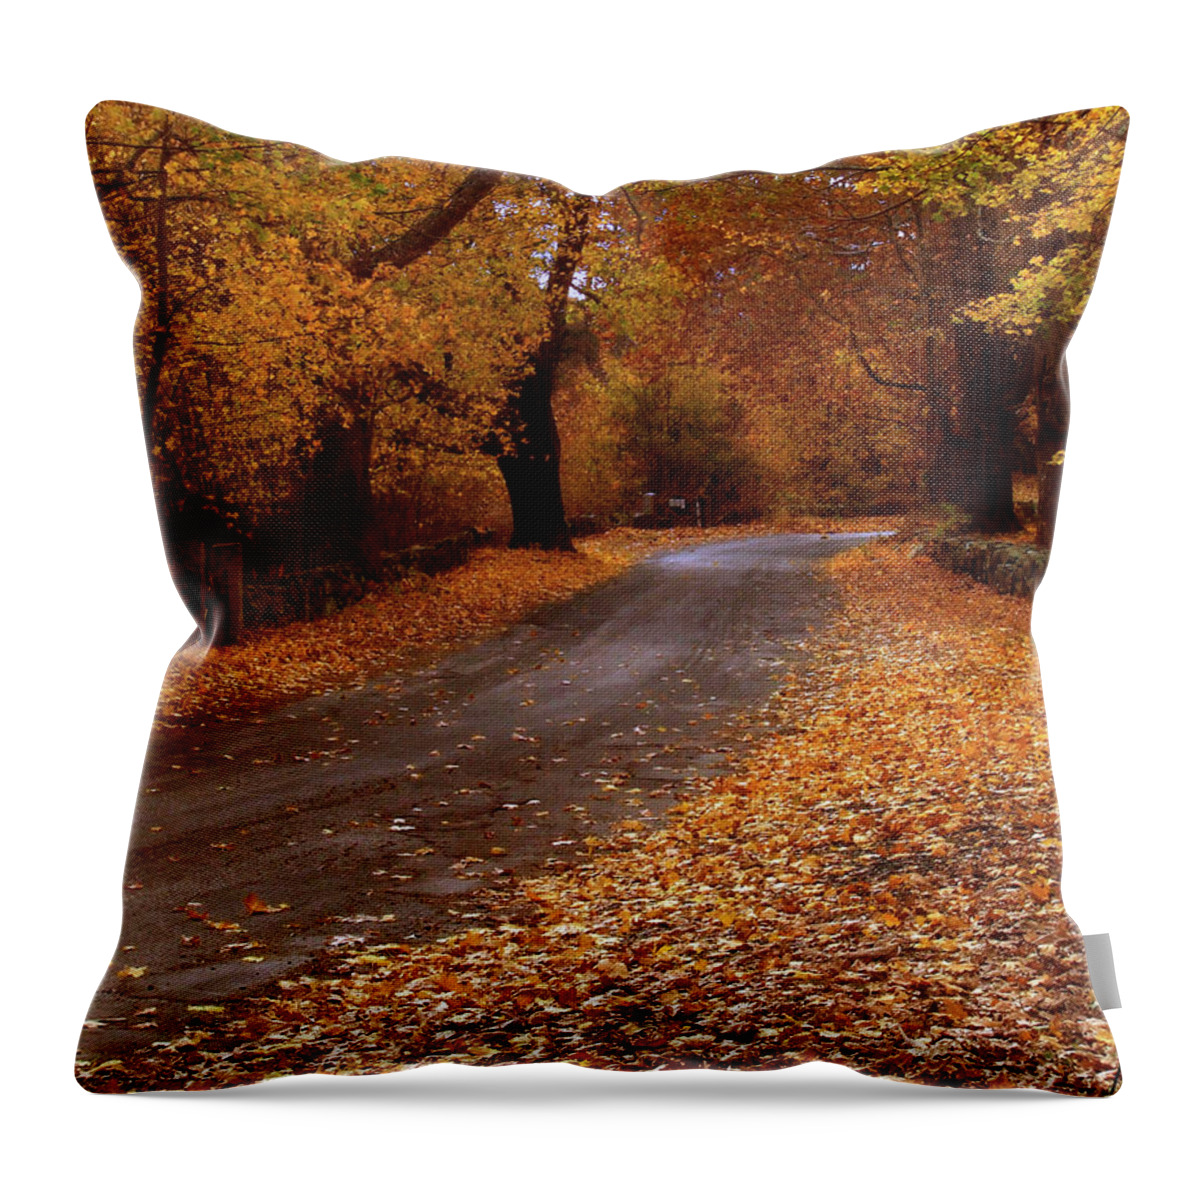  Throw Pillow featuring the photograph Country Road by Mark Valentine